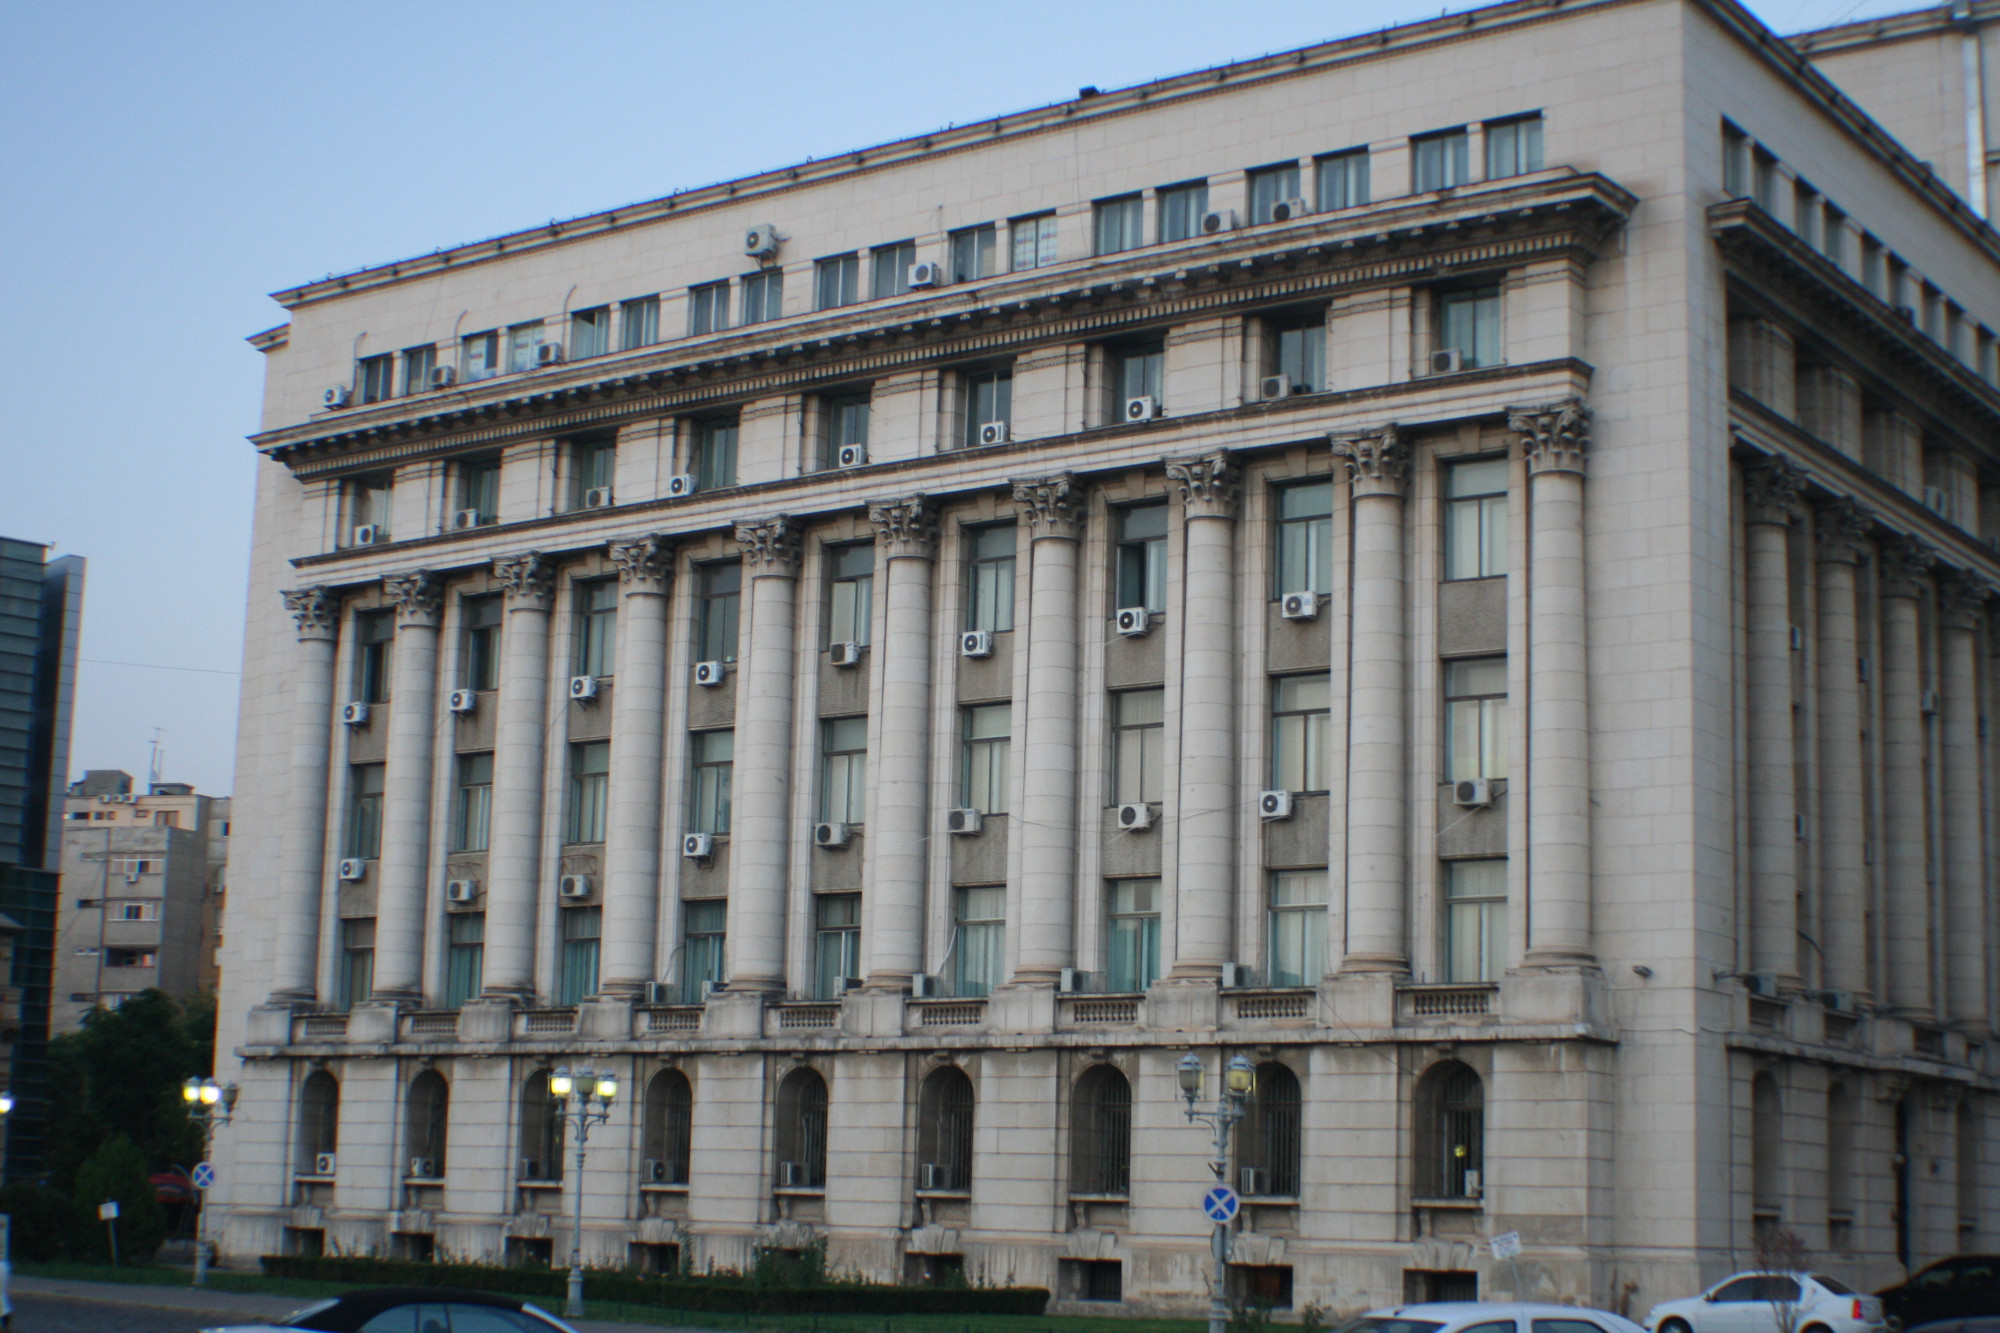 Central Committee of the Romanian Communist Party Building<br/>
